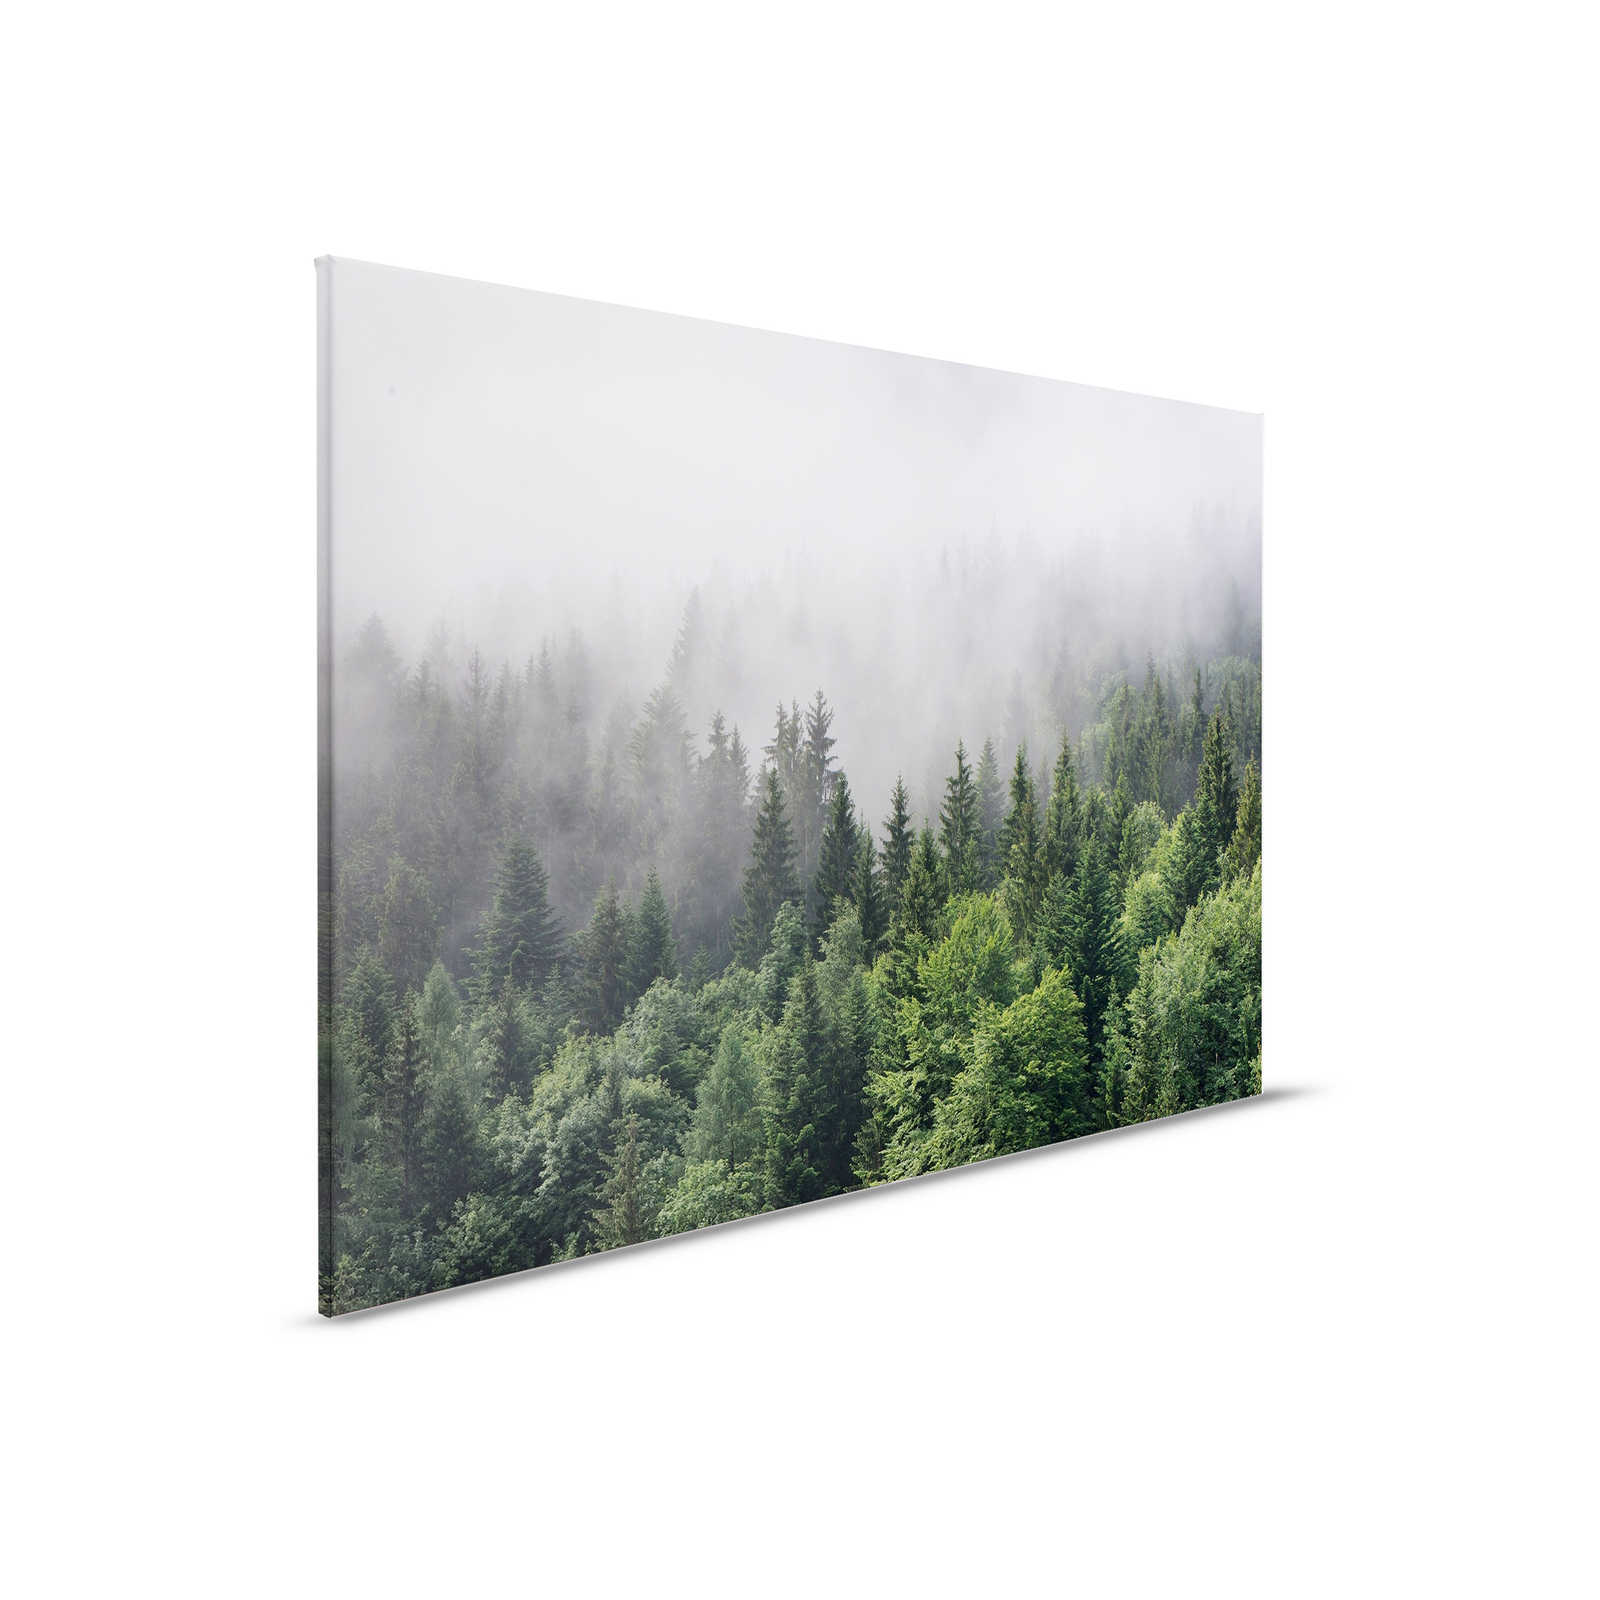         Canvas with forest from above on a foggy day - 0.90 m x 0.60 m
    